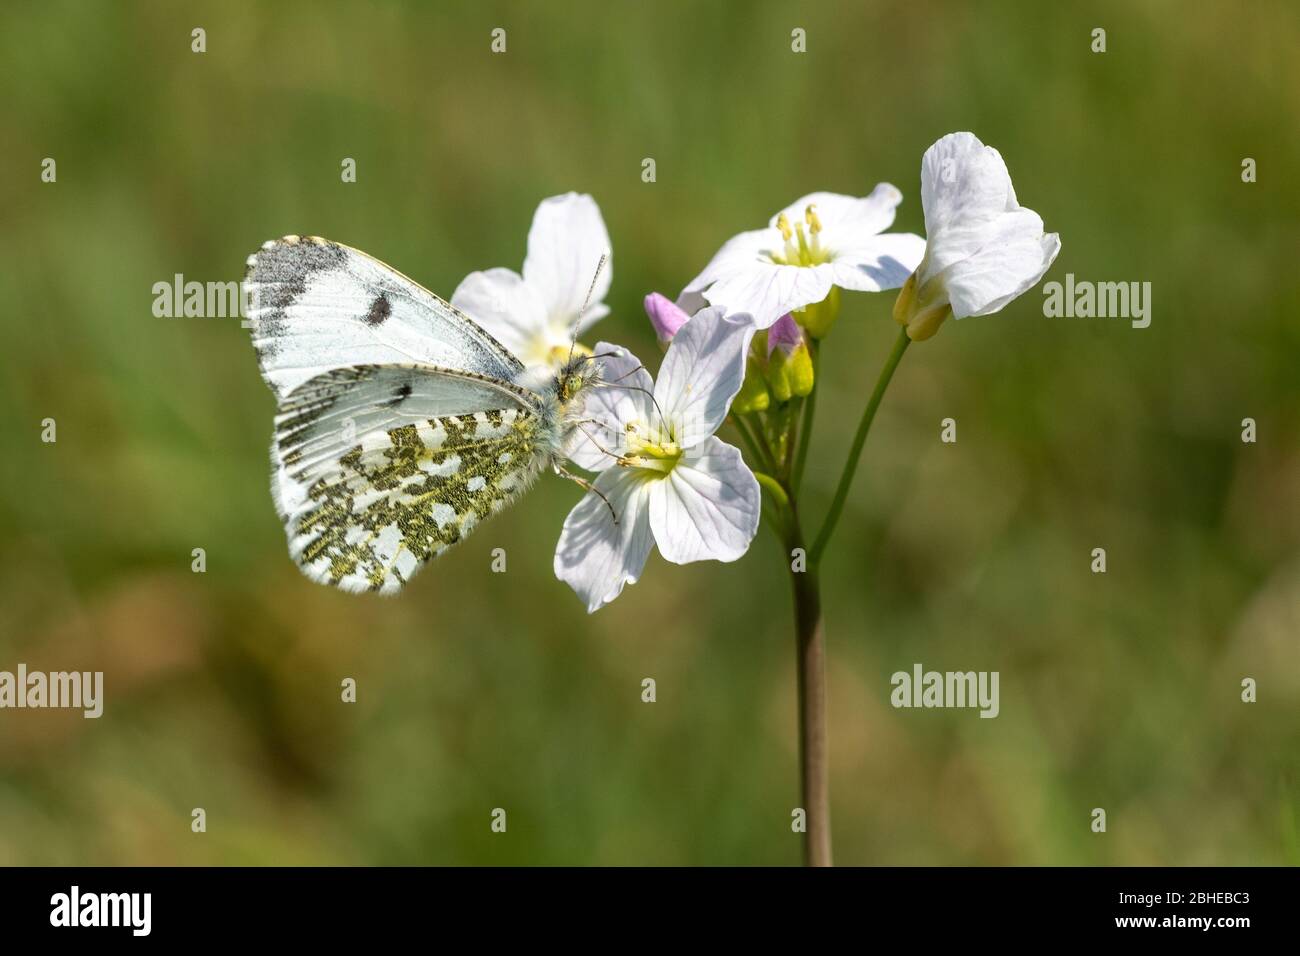 Female orange-tip butterfly (Anthocharis cardamines) nectaring on a cuckooflower (Cardamine pratensis) during April, UK Stock Photo